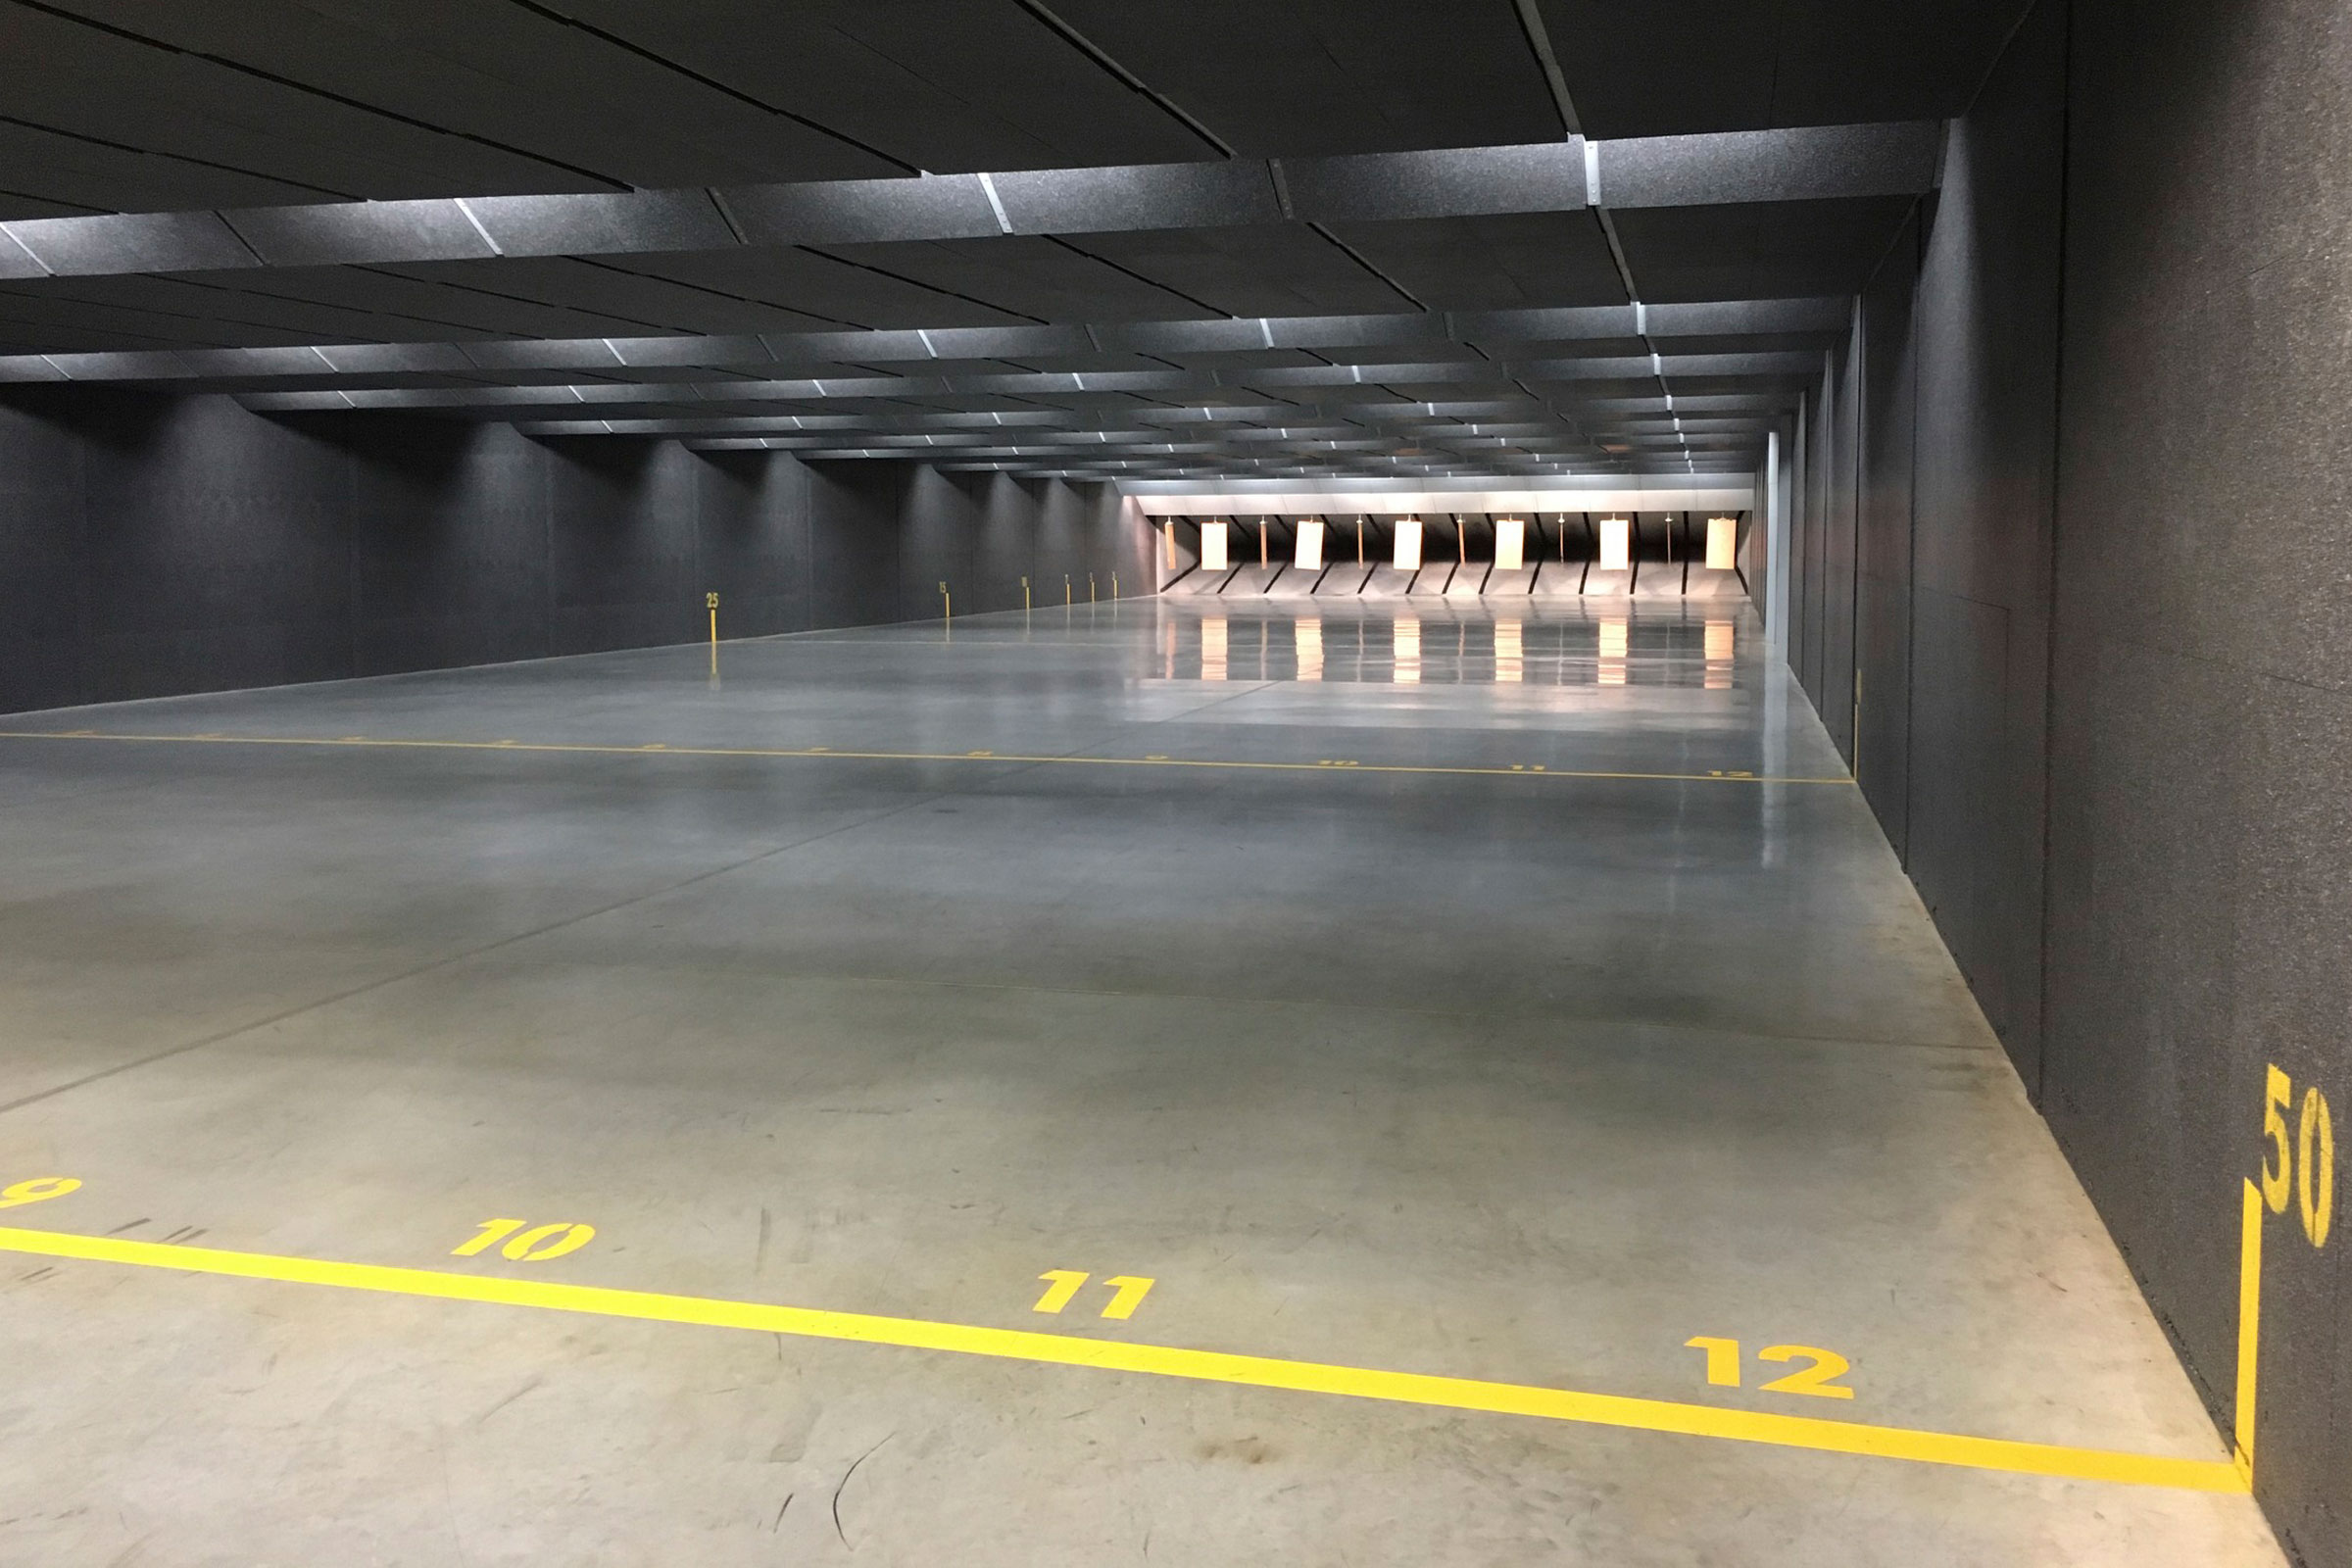 Buncombe County Indoor Firearms Training Facility in Asheville, North Carolina